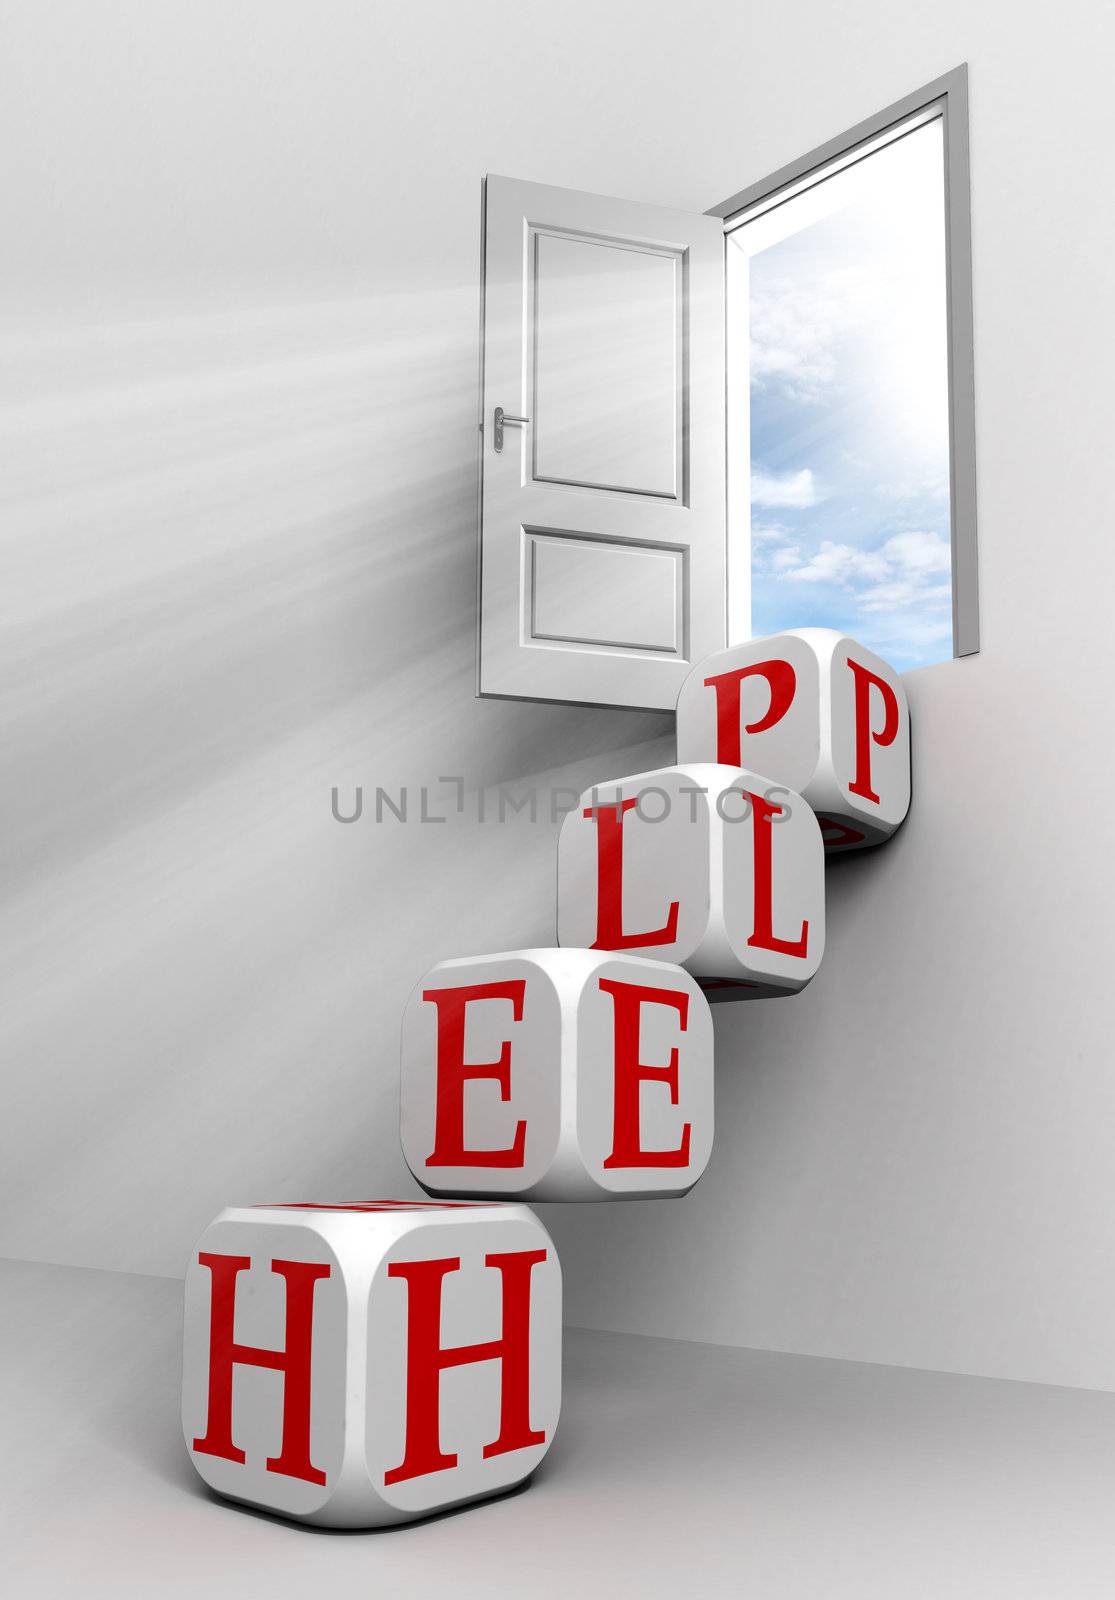 help conceptual door with sky and box red word  ladder in white room metaphor 